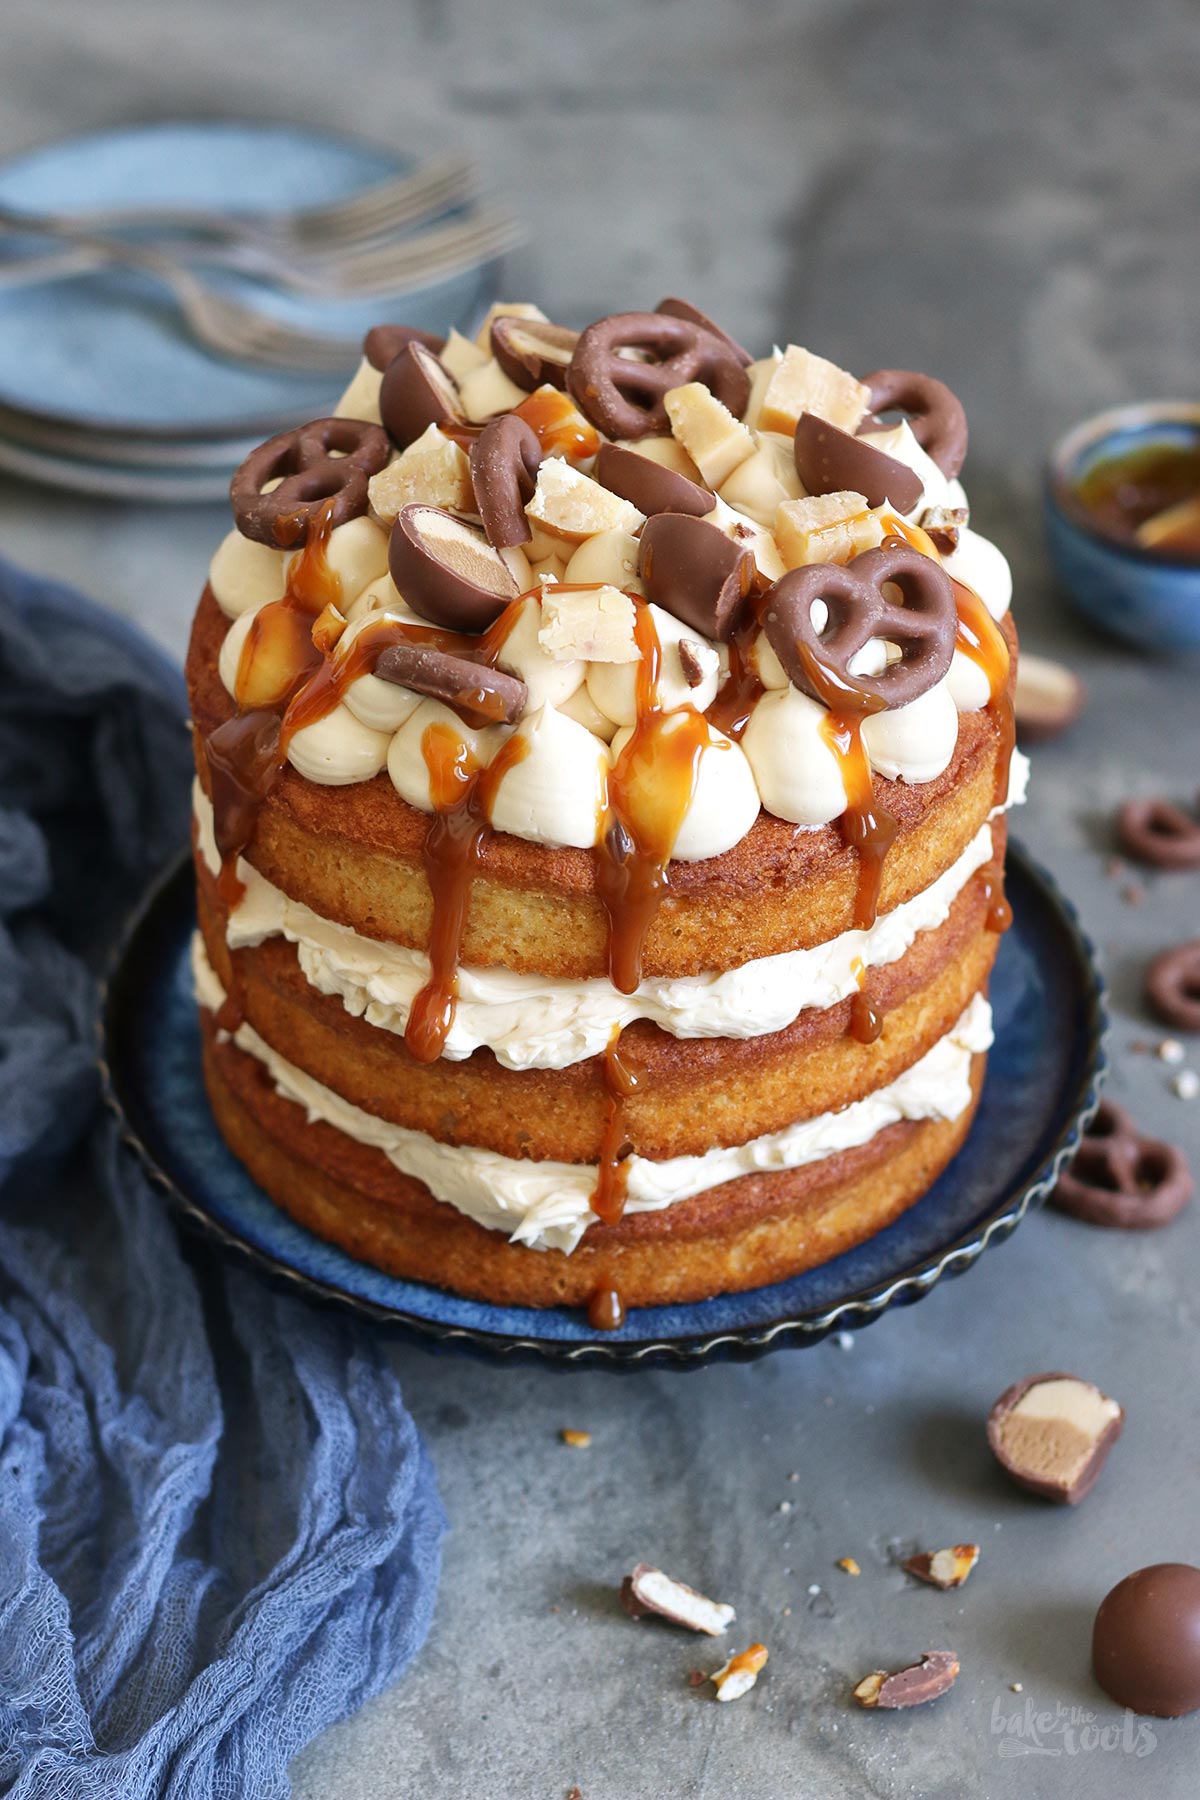 Salted Caramel Cake | Bake to the roots